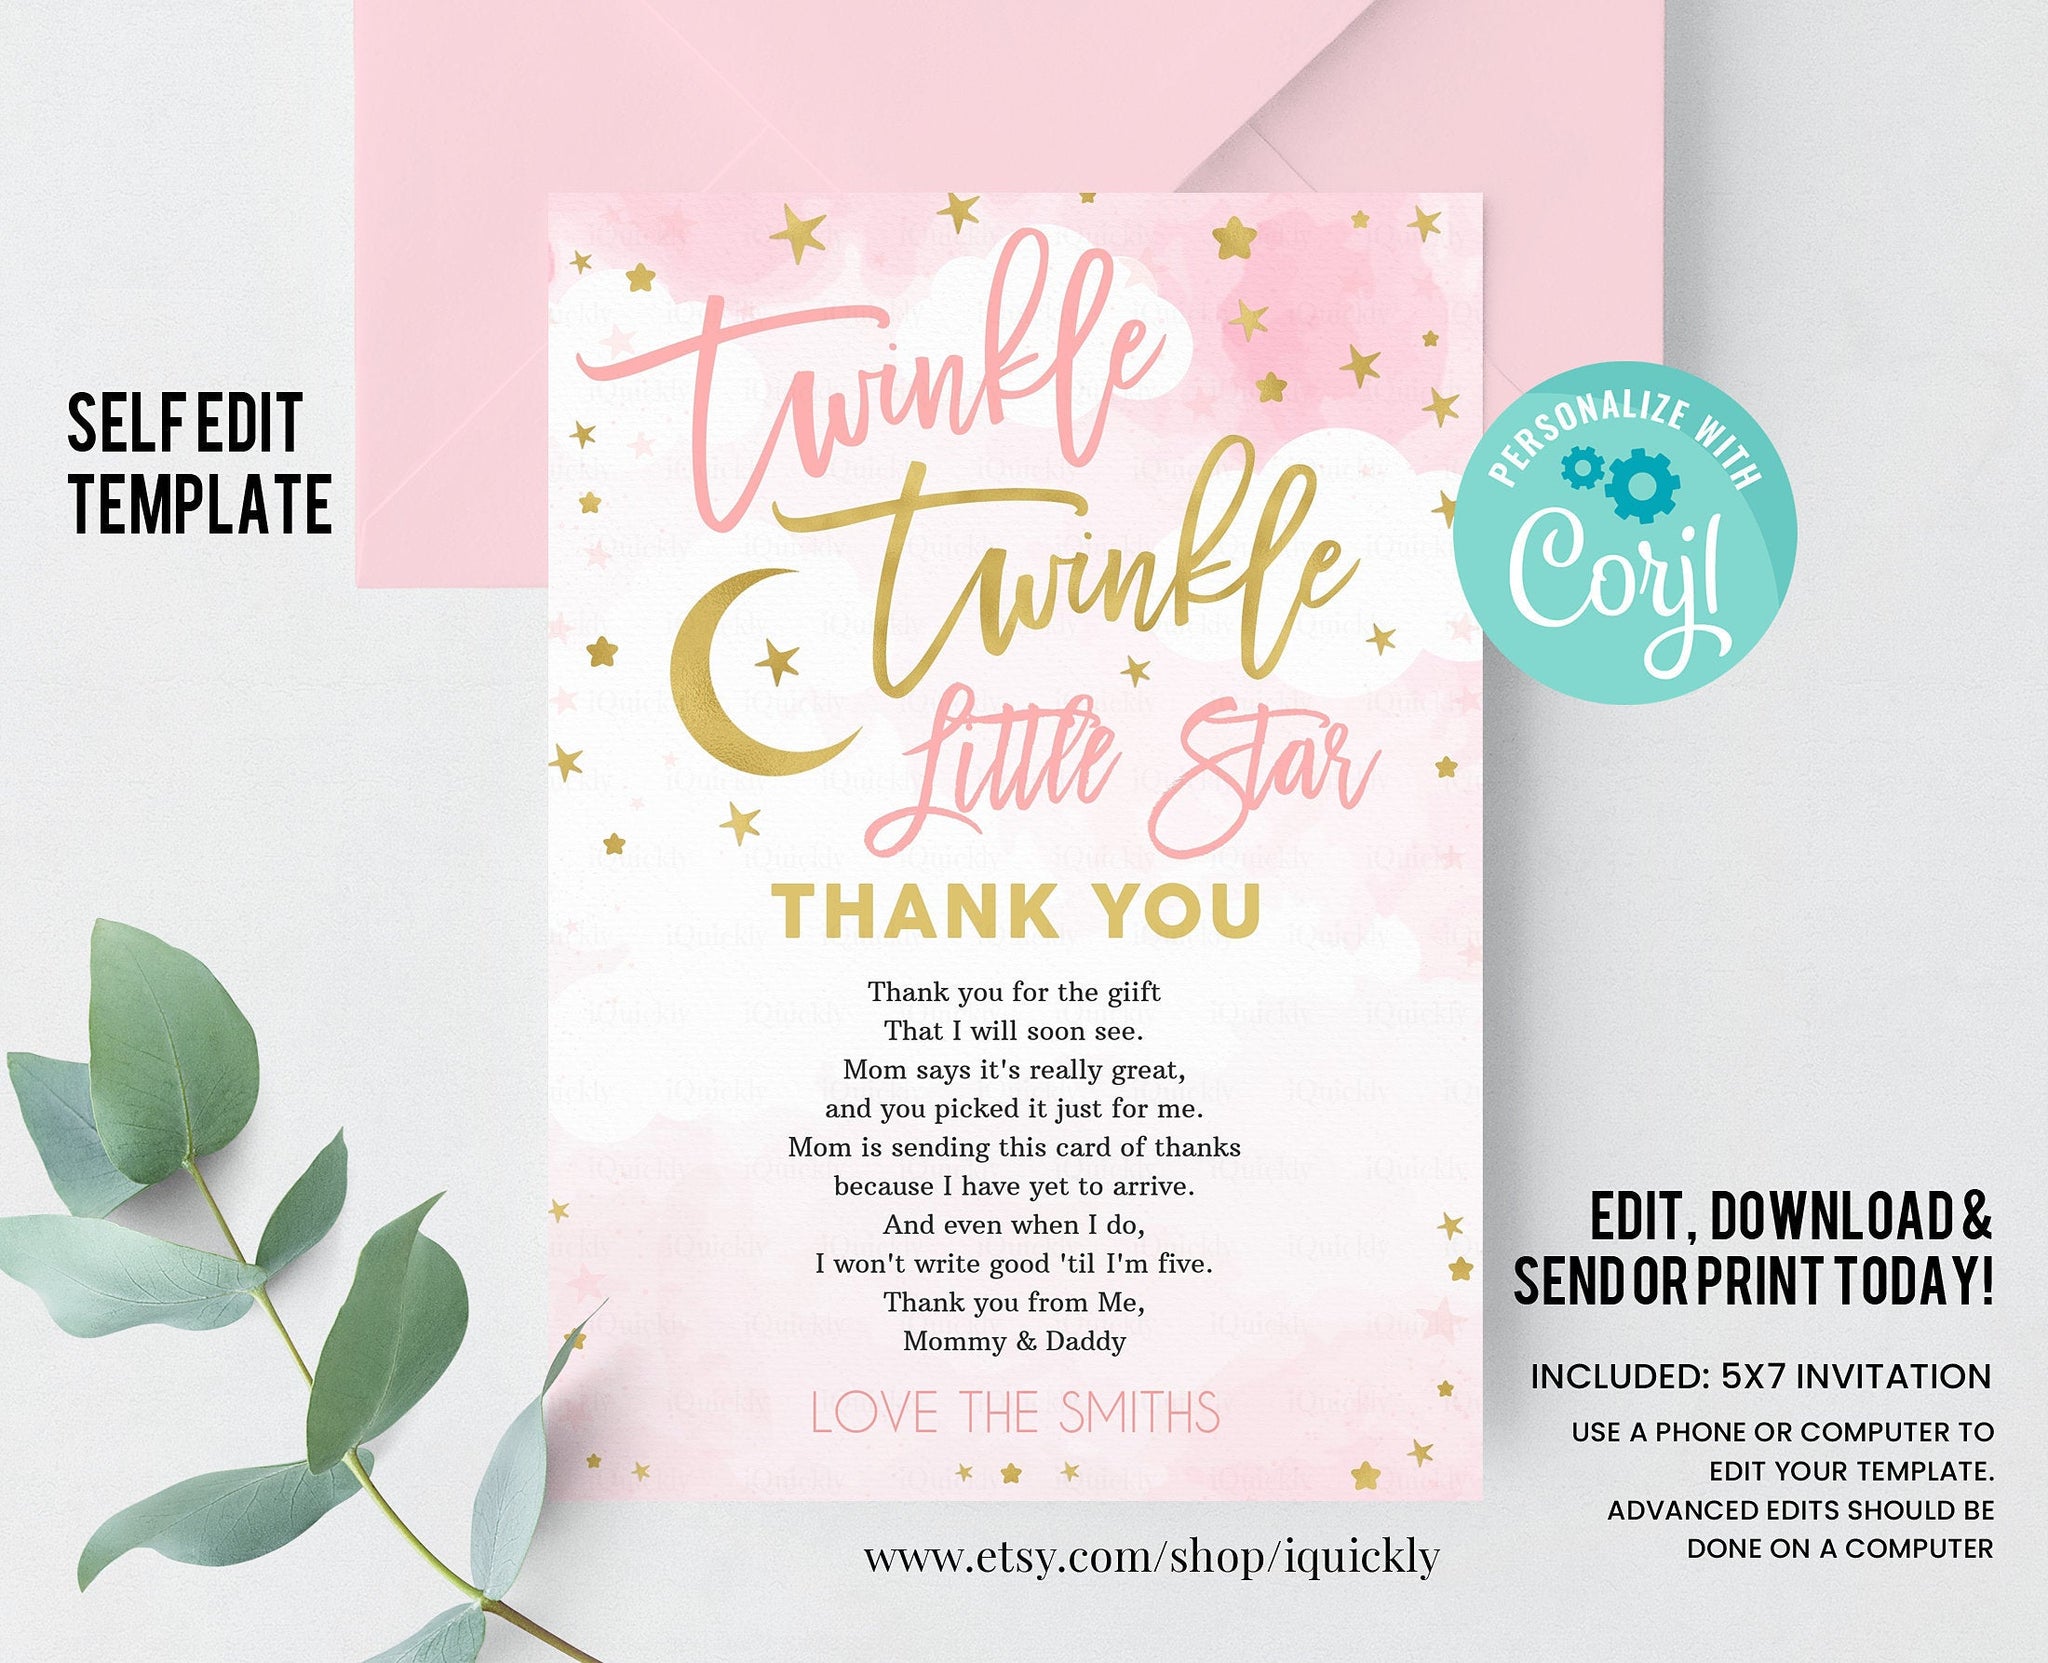 Editable Drive by twinkle twinkle little star thank you card pink, Shower by mail thank you card, Drive Through, Drive Thru Instant download